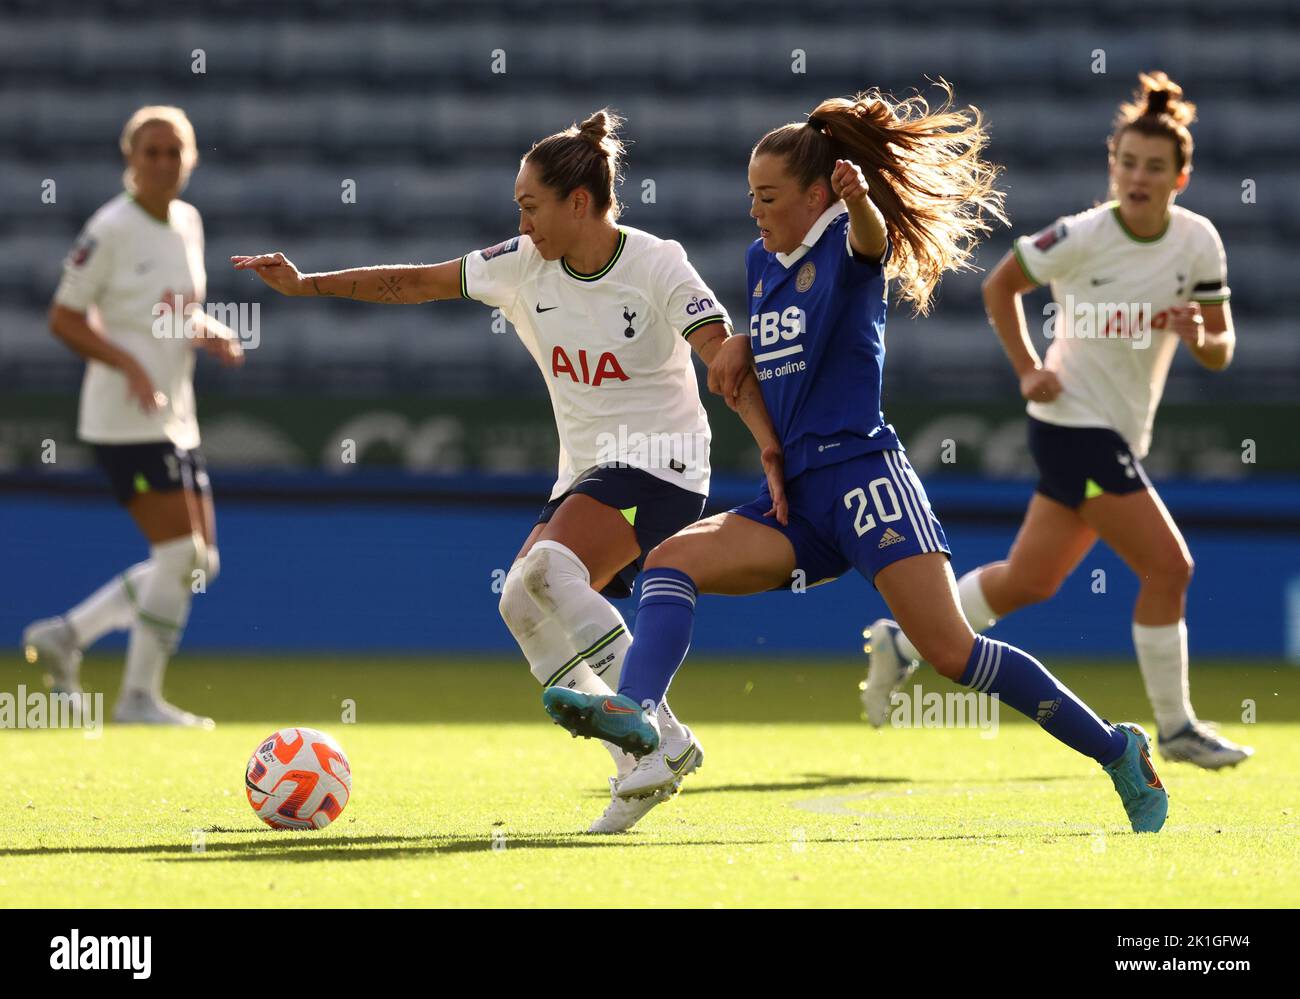 Leicester, UK. 18th September 2022. Missy Goodwin of Leicester City (R) challenges Kyah Simon of Tottenham Hotspur during the The FA Women's Super League match at the King Power Stadium, Leicester. Picture credit should read: Darren Staples / Sportimage Credit: Sportimage/Alamy Live News Stock Photo